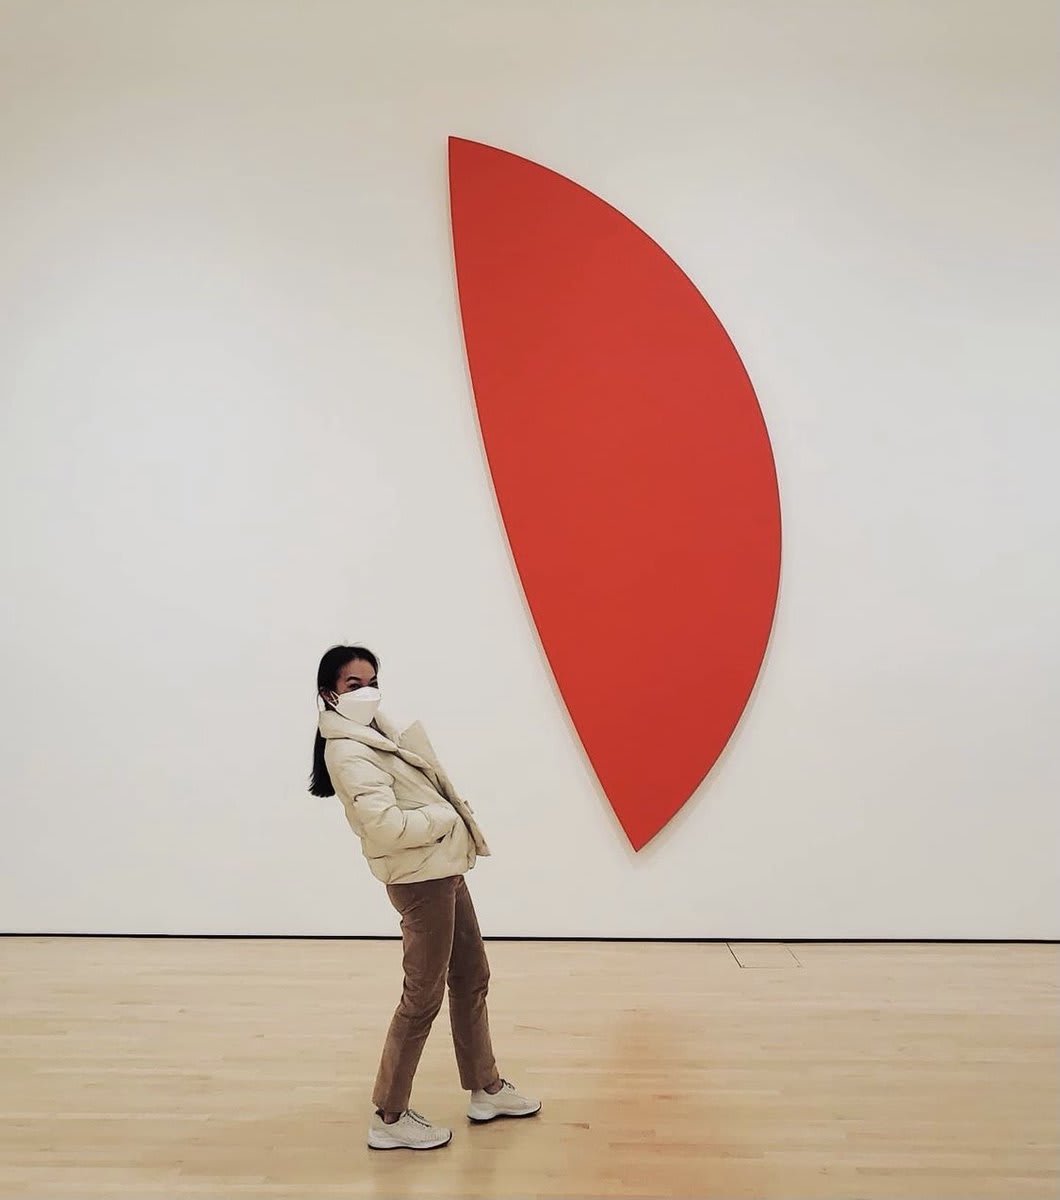 Leaning into the weekend with Ellsworth Kelly's "Red Curves," (1996). 📸: Instagram user aeung123 🔗 Plan your visit safely this weekend: https://t.co/7bAXENYcPH See Kelly's works on Floor 4 as part of 𝘼𝙥𝙥𝙧𝙤𝙖𝙘𝙝𝙞𝙣𝙜 𝘼𝙢𝙚𝙧𝙞𝙘𝙖𝙣 𝘼𝙗𝙨𝙩𝙧𝙖𝙘𝙩𝙞𝙤𝙣.